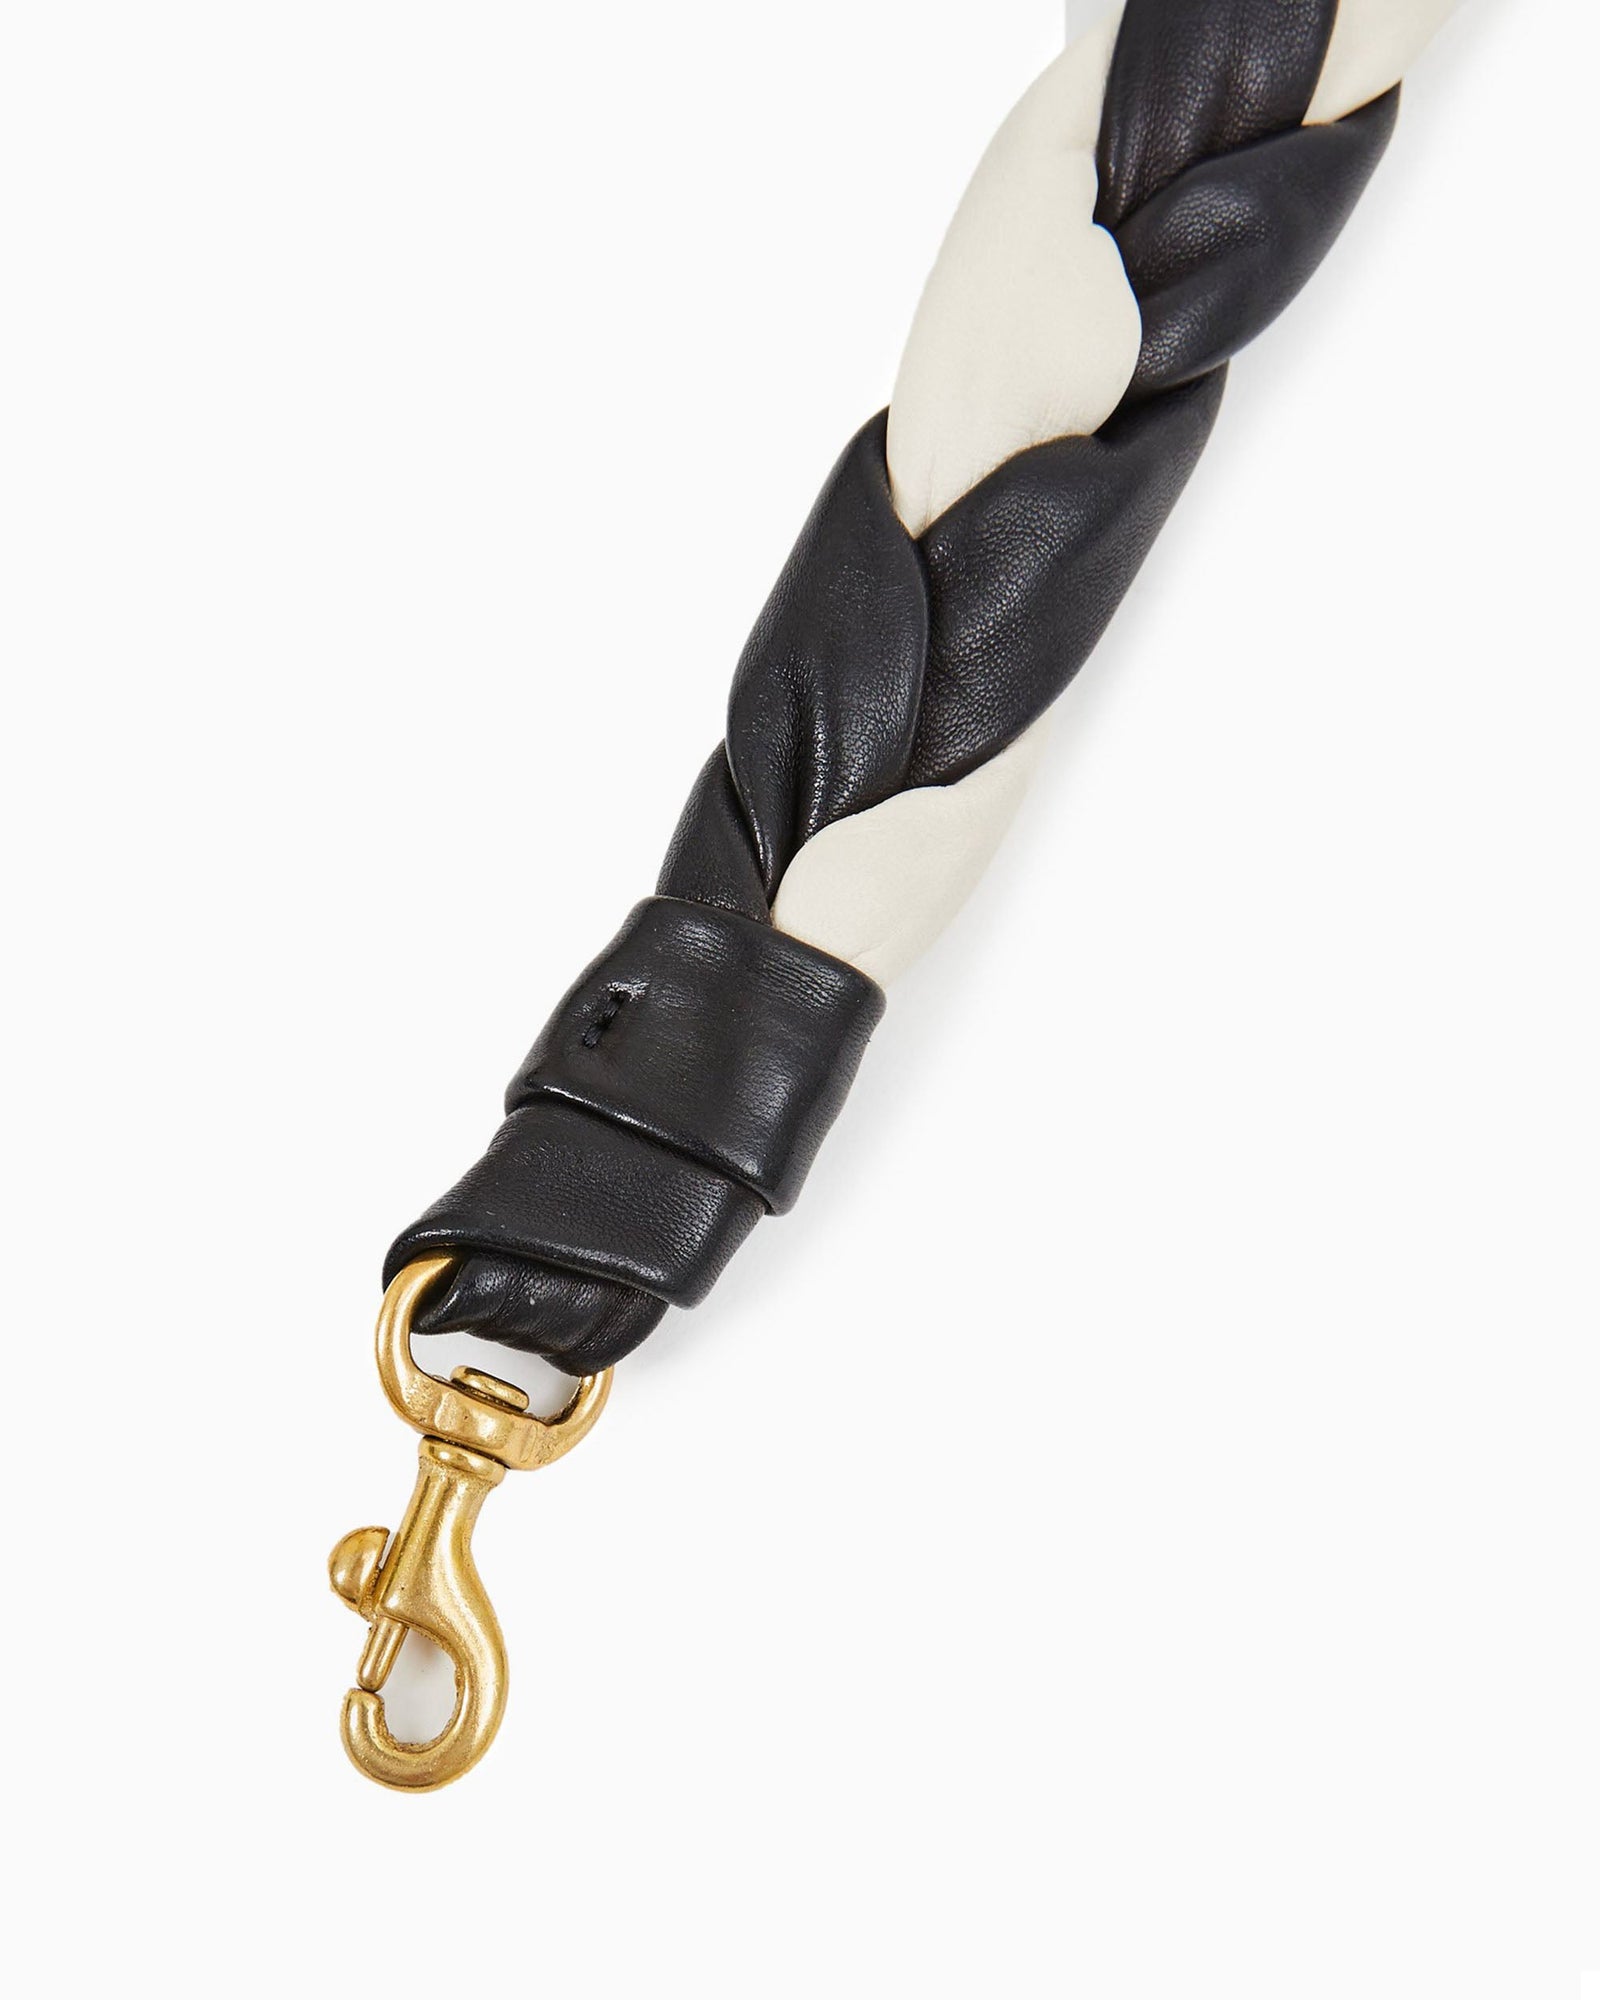  Black and Cream Italian Nappa Braided Leather Shoulder Strap - Detail